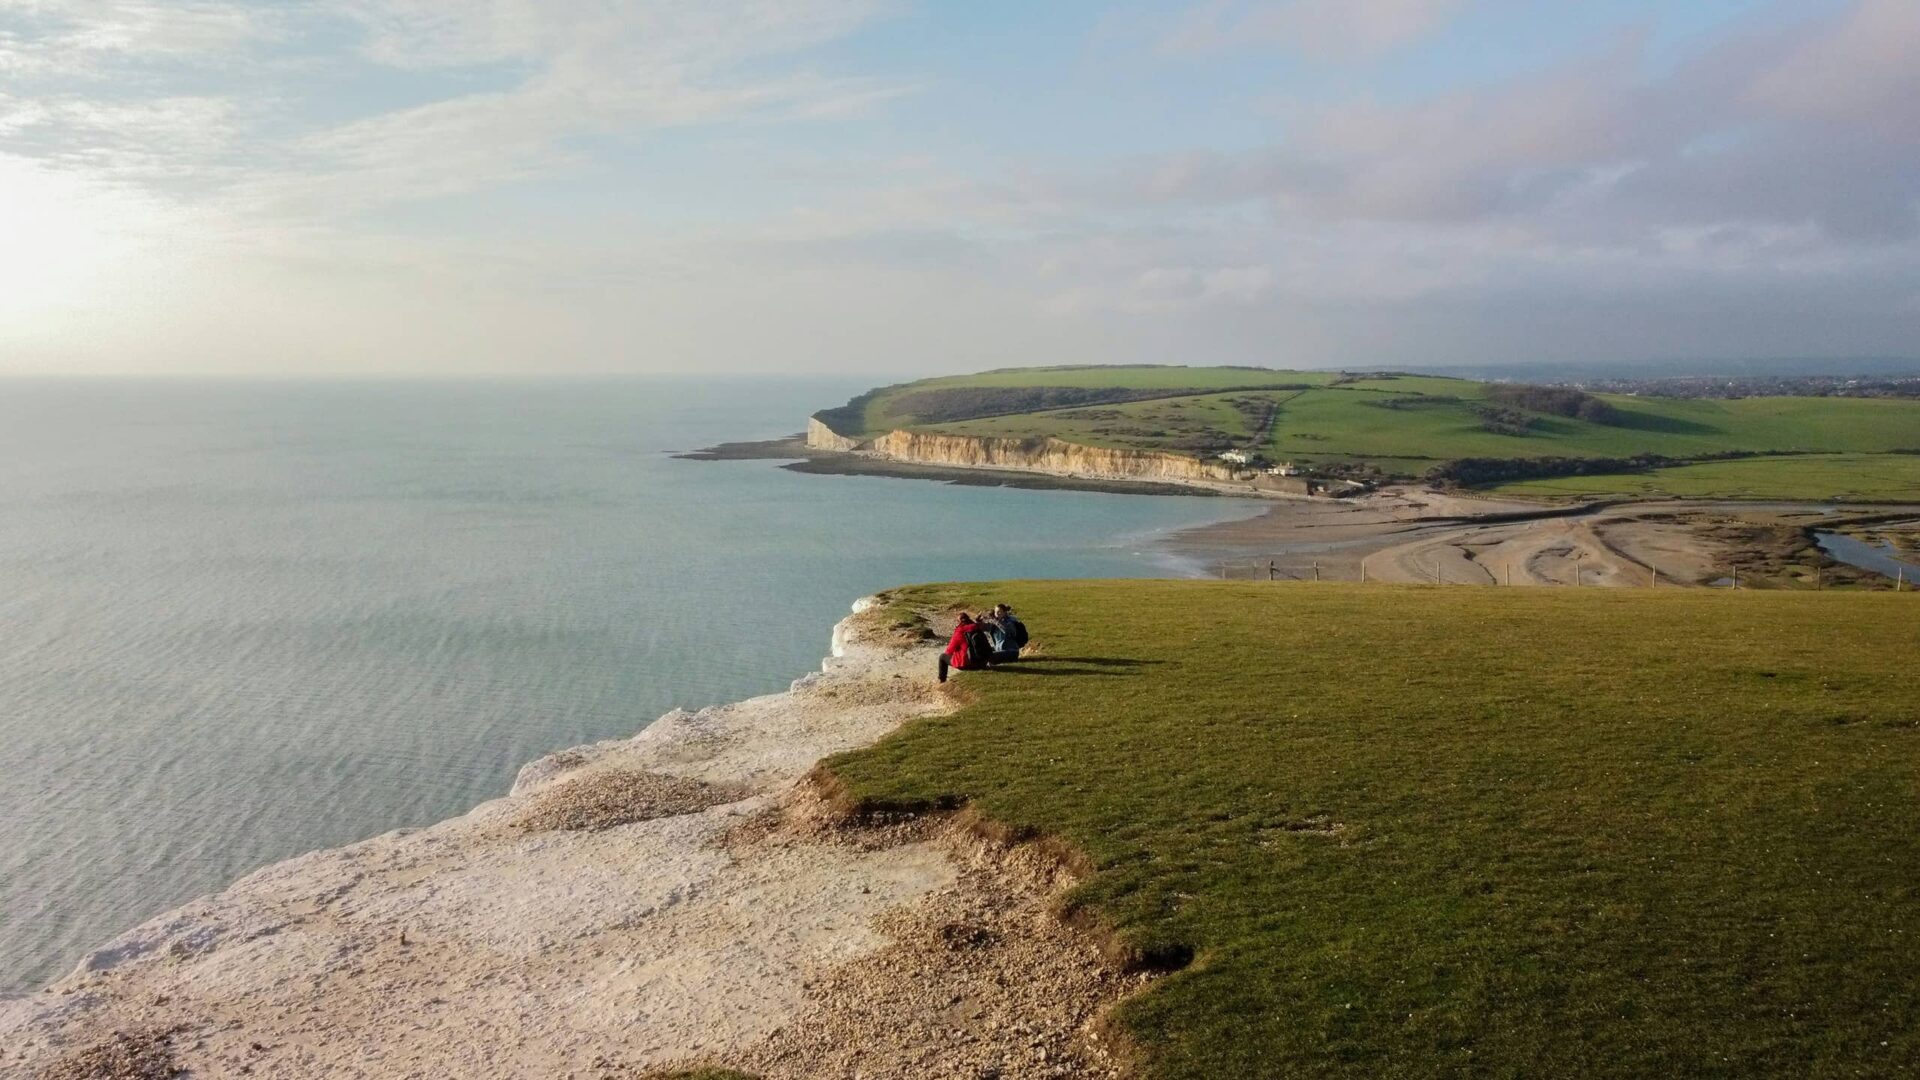 View on the ocean from the Seven Sisters Cliffs in the south of England